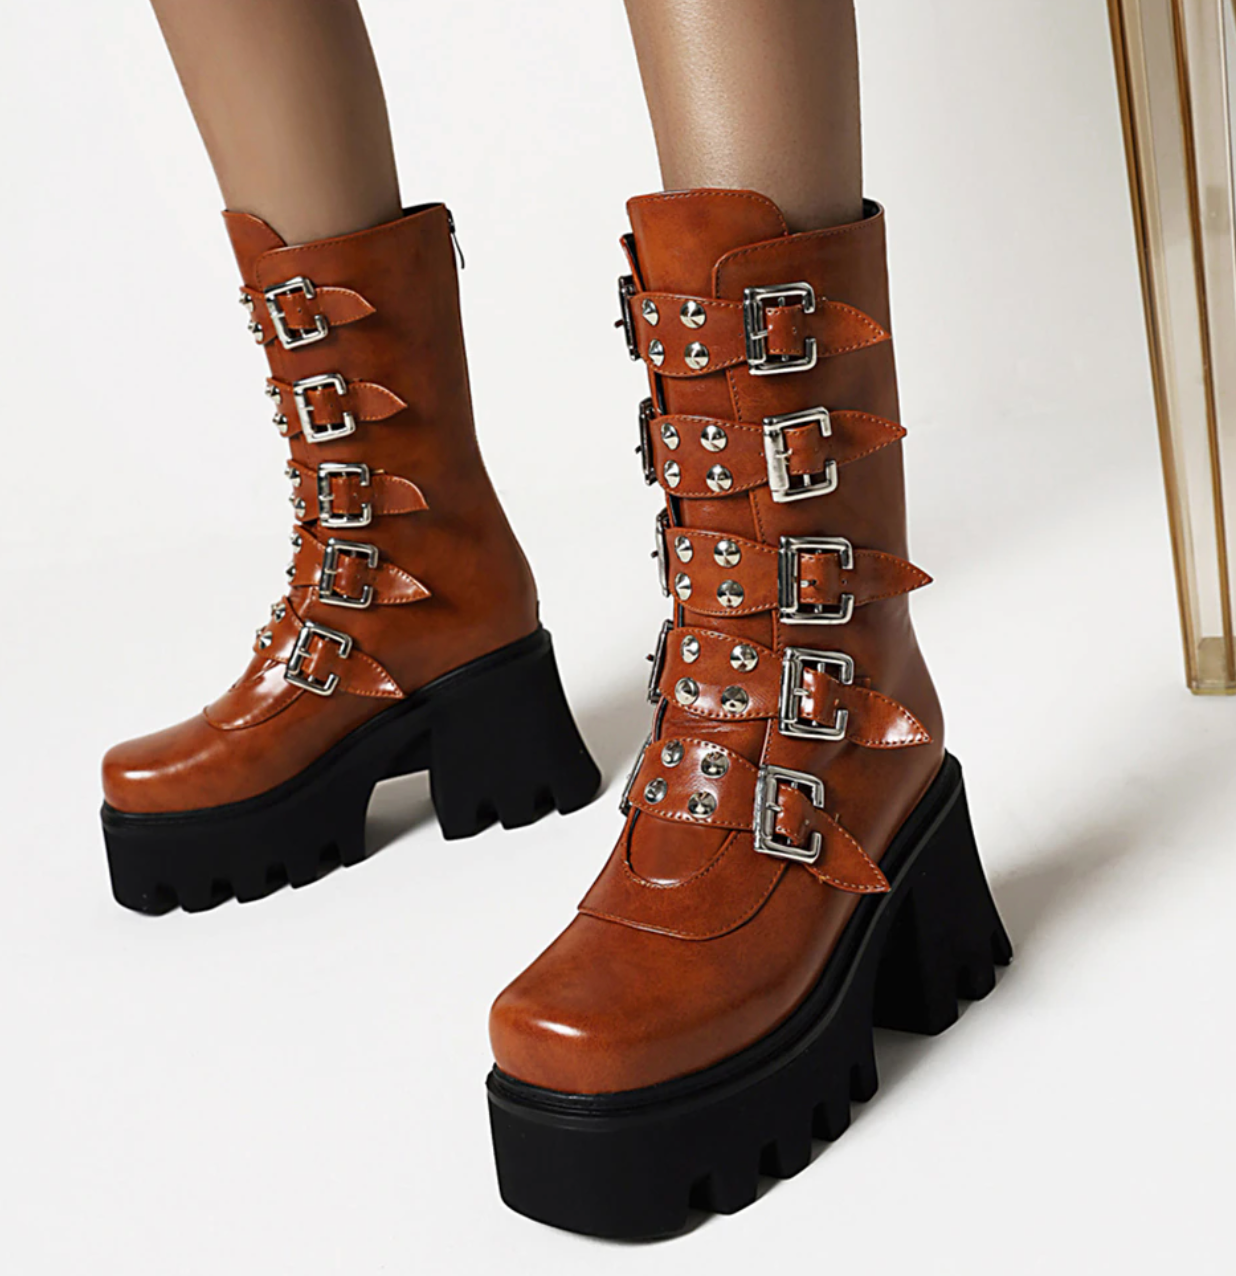 Buckle Straps With Zipper Boots